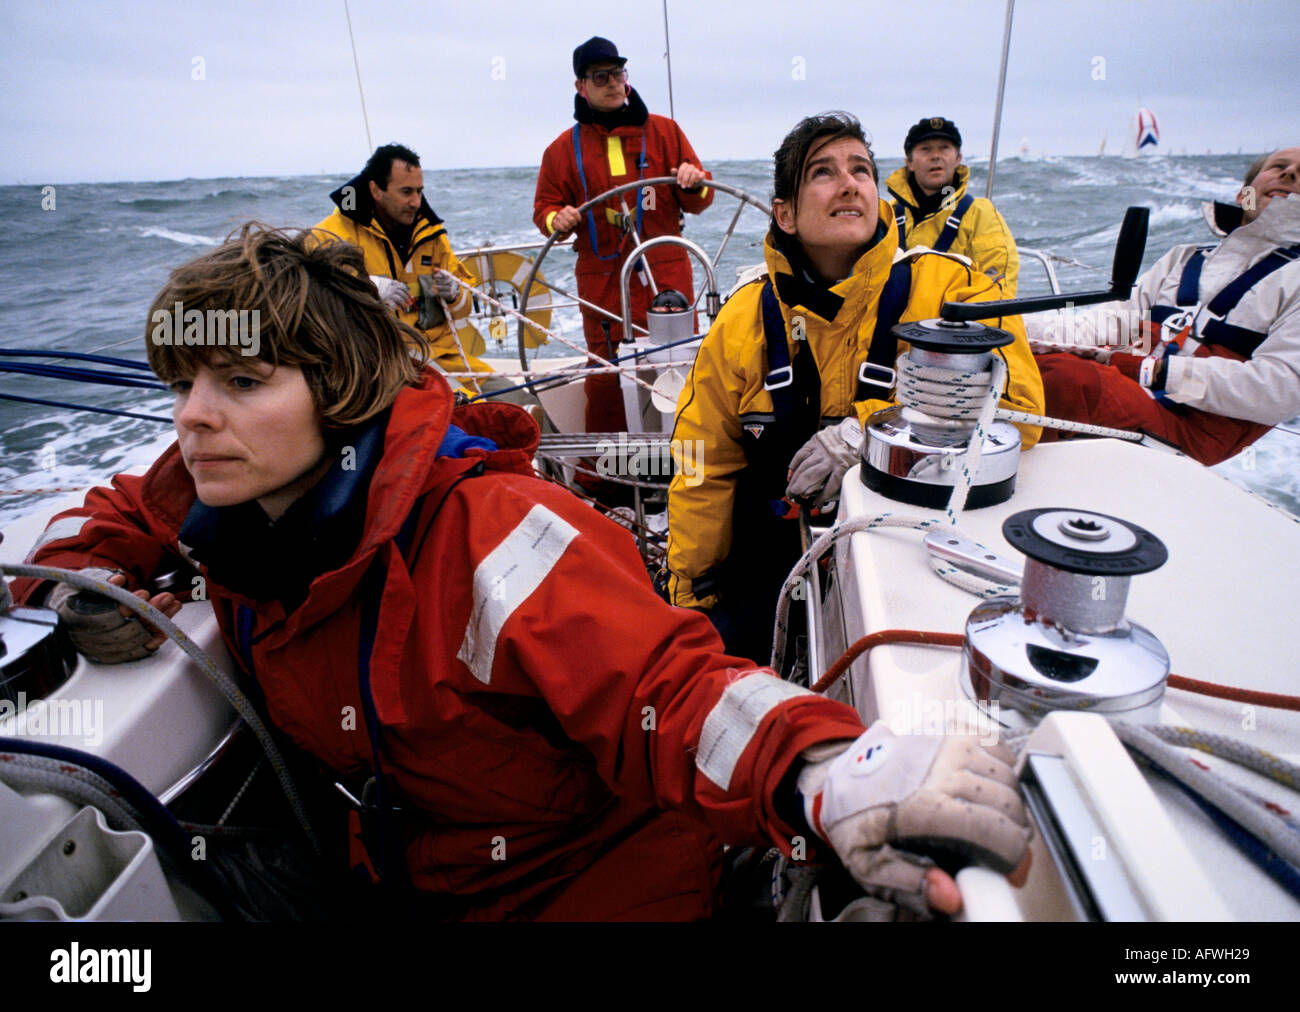 Teamwork racing yacht women sailing racing yachts. Crew in The Round the Island Race race the Isle of Wight England 1980s UK HOMER SYKES Stock Photo